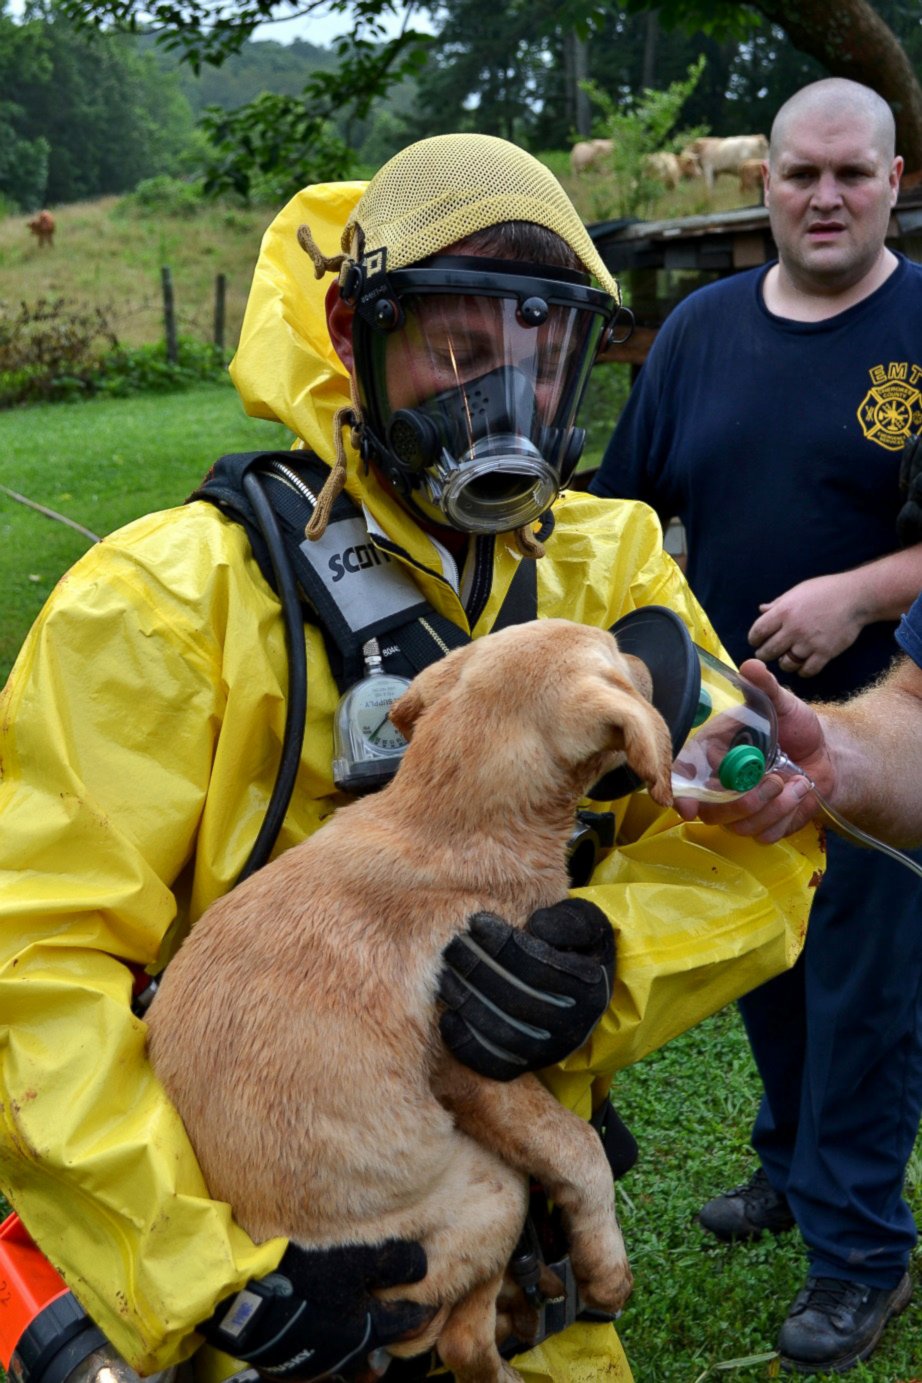 PHOTO: The Cherokee County Fire Department in Georgia rescued a yellow Labrador puppy from a 75-foot well on July 5, 2015.